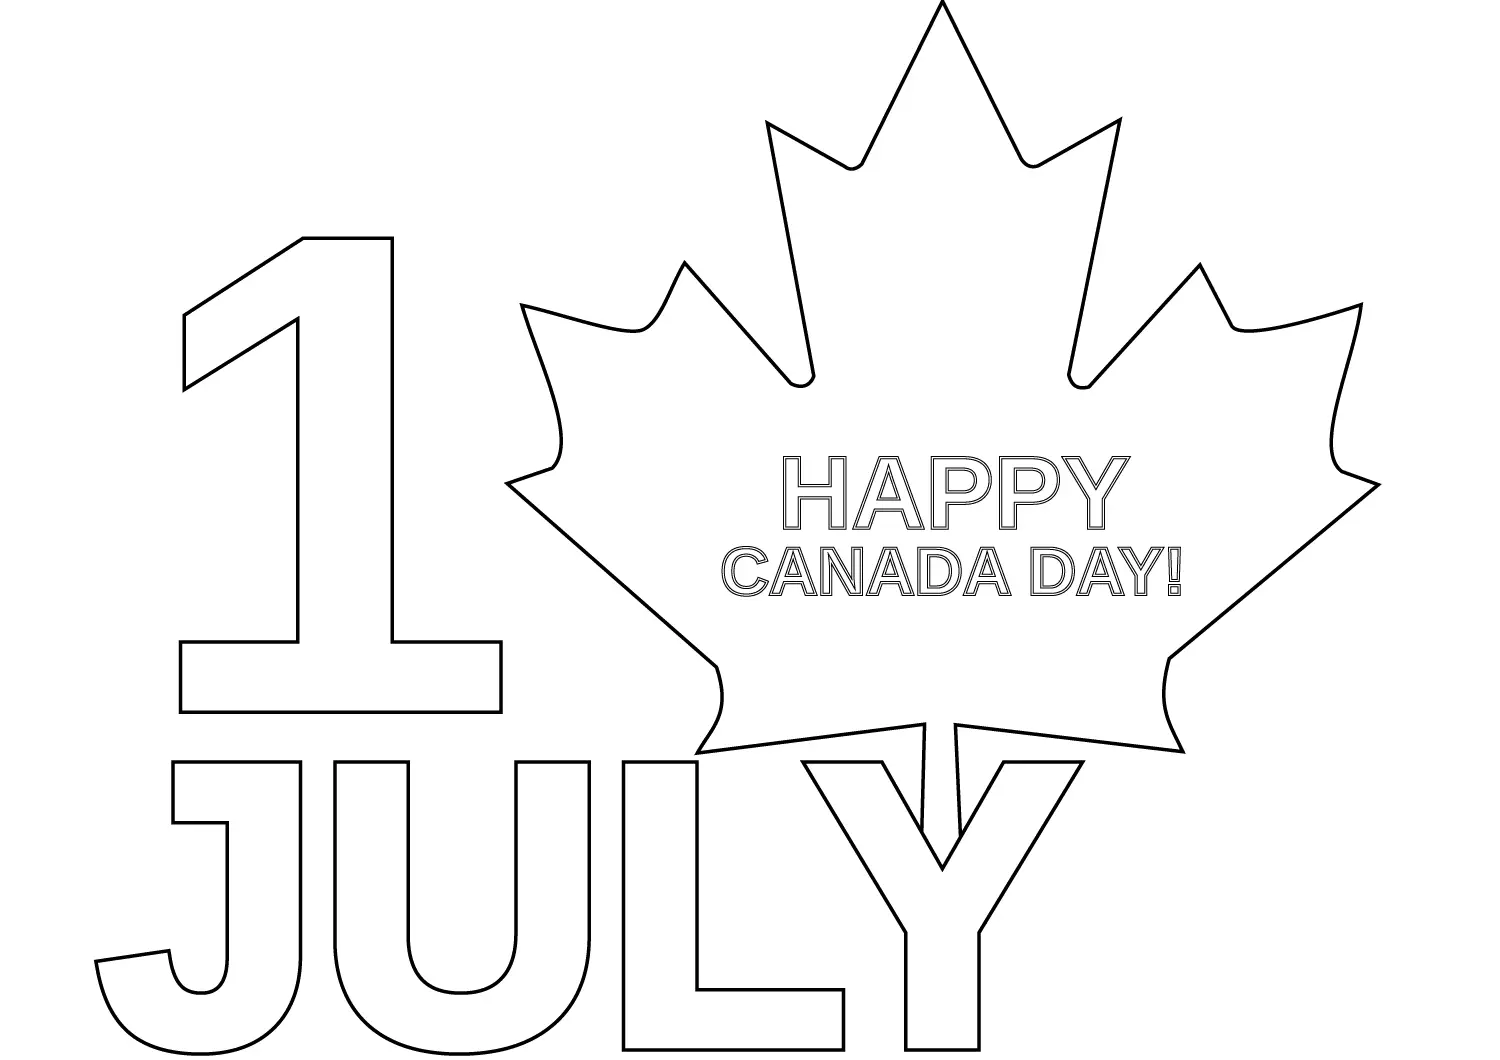 1st of July CANADA DAY Free Clipart Public Domain Coloring Pages Line Art Drawings for Kids